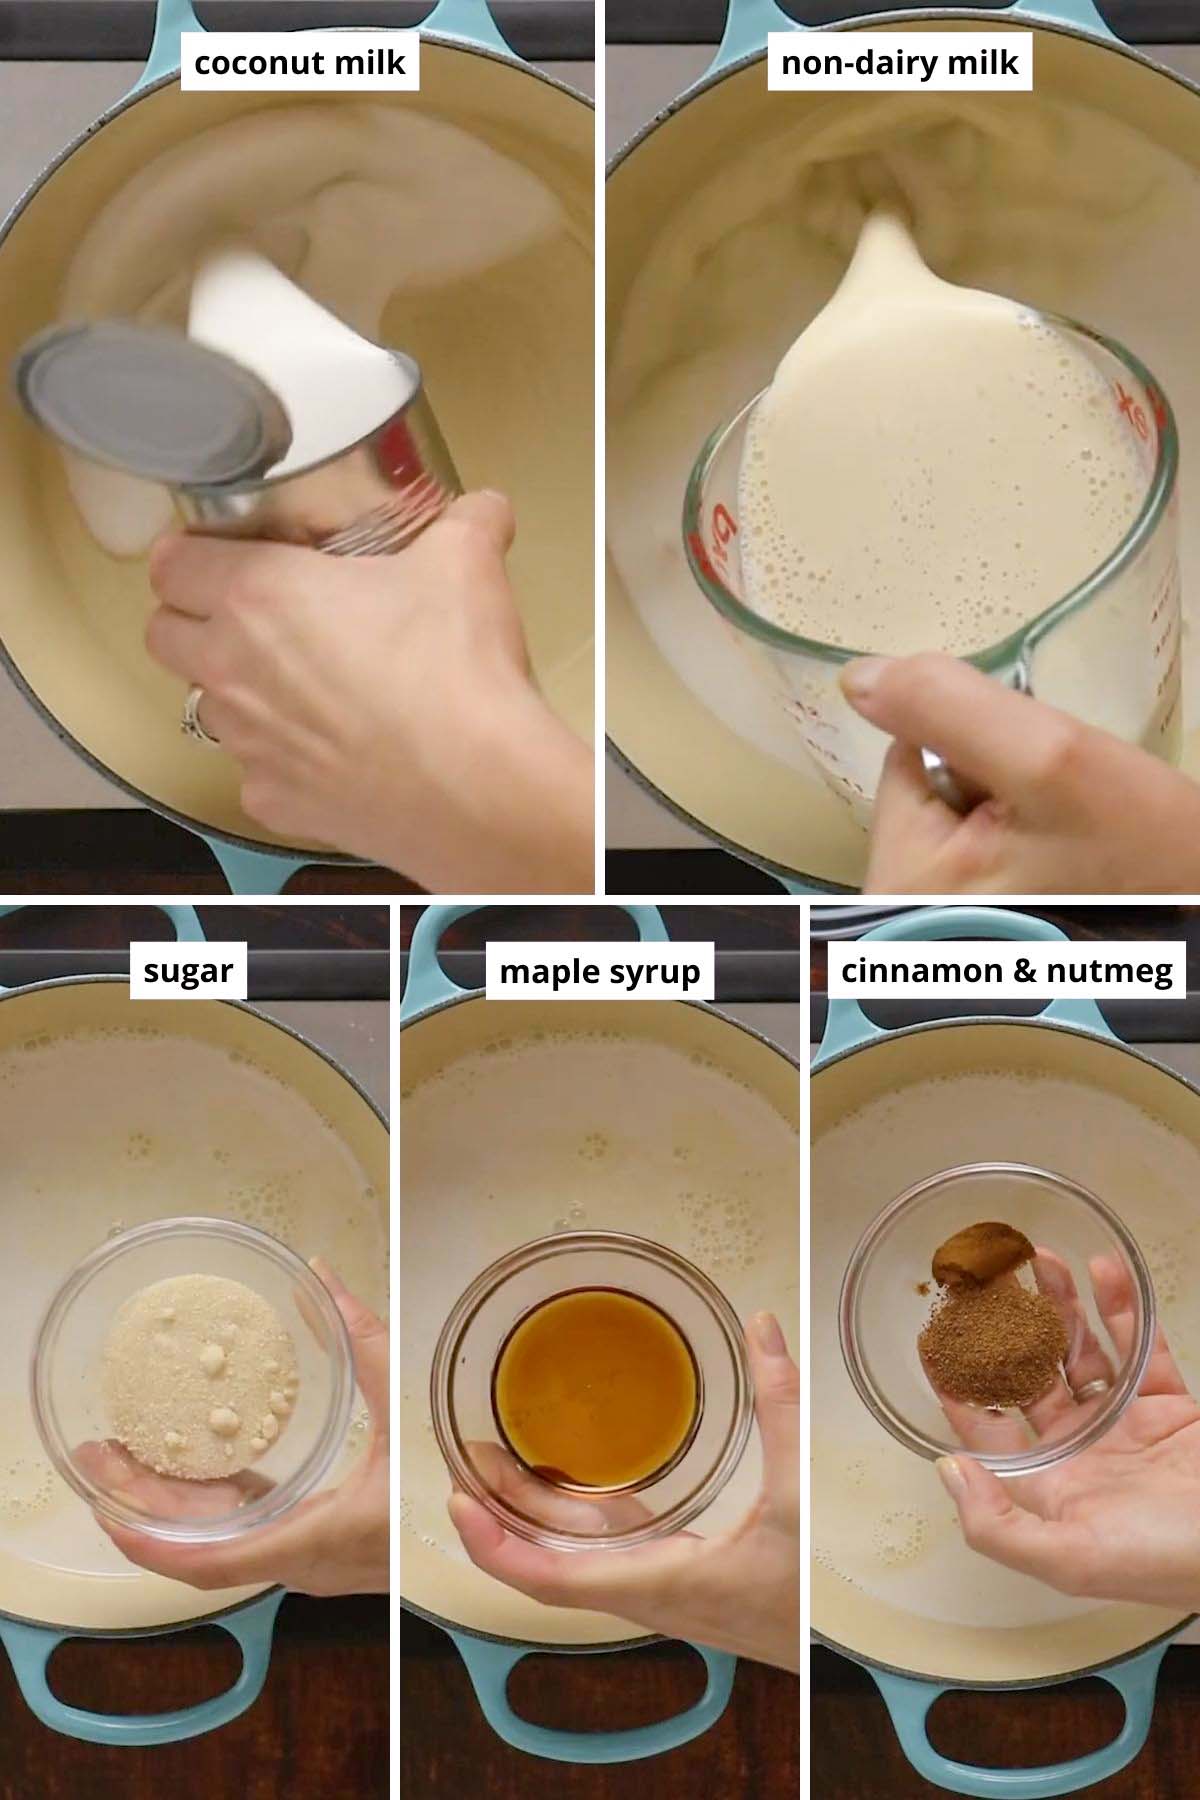 image collage showing adding the coconut milk, non-dairy milk, sugar, maple syrup, and spices to the pot